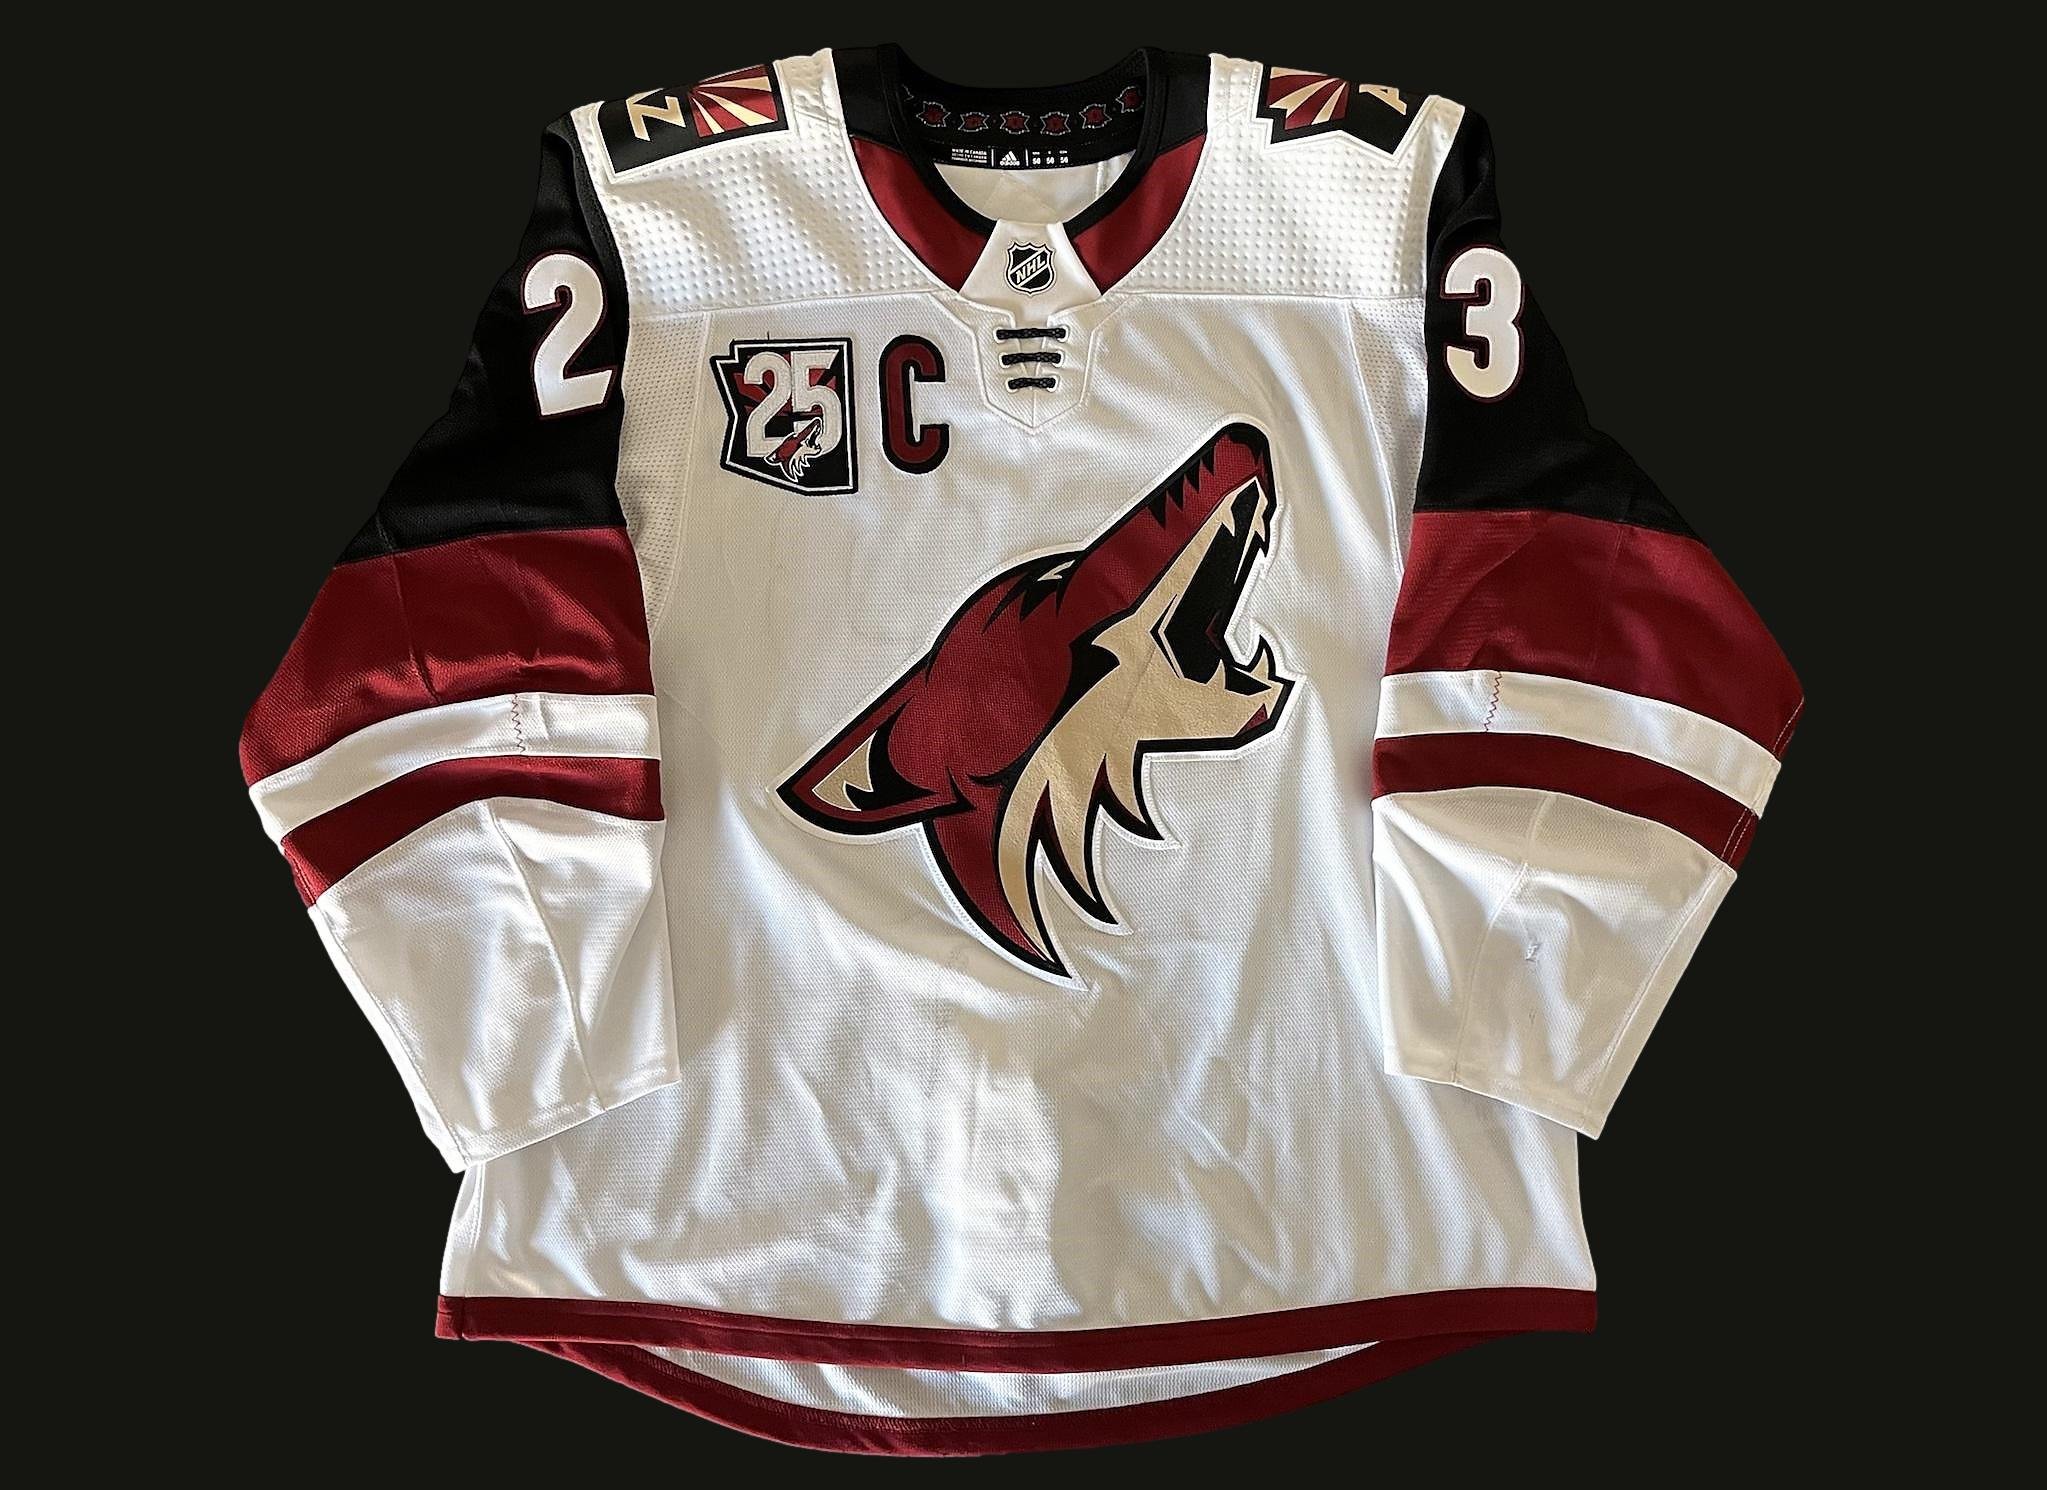 NHL uniforms: Third, alternate jerseys, sweaters for Arizona Coyotes?